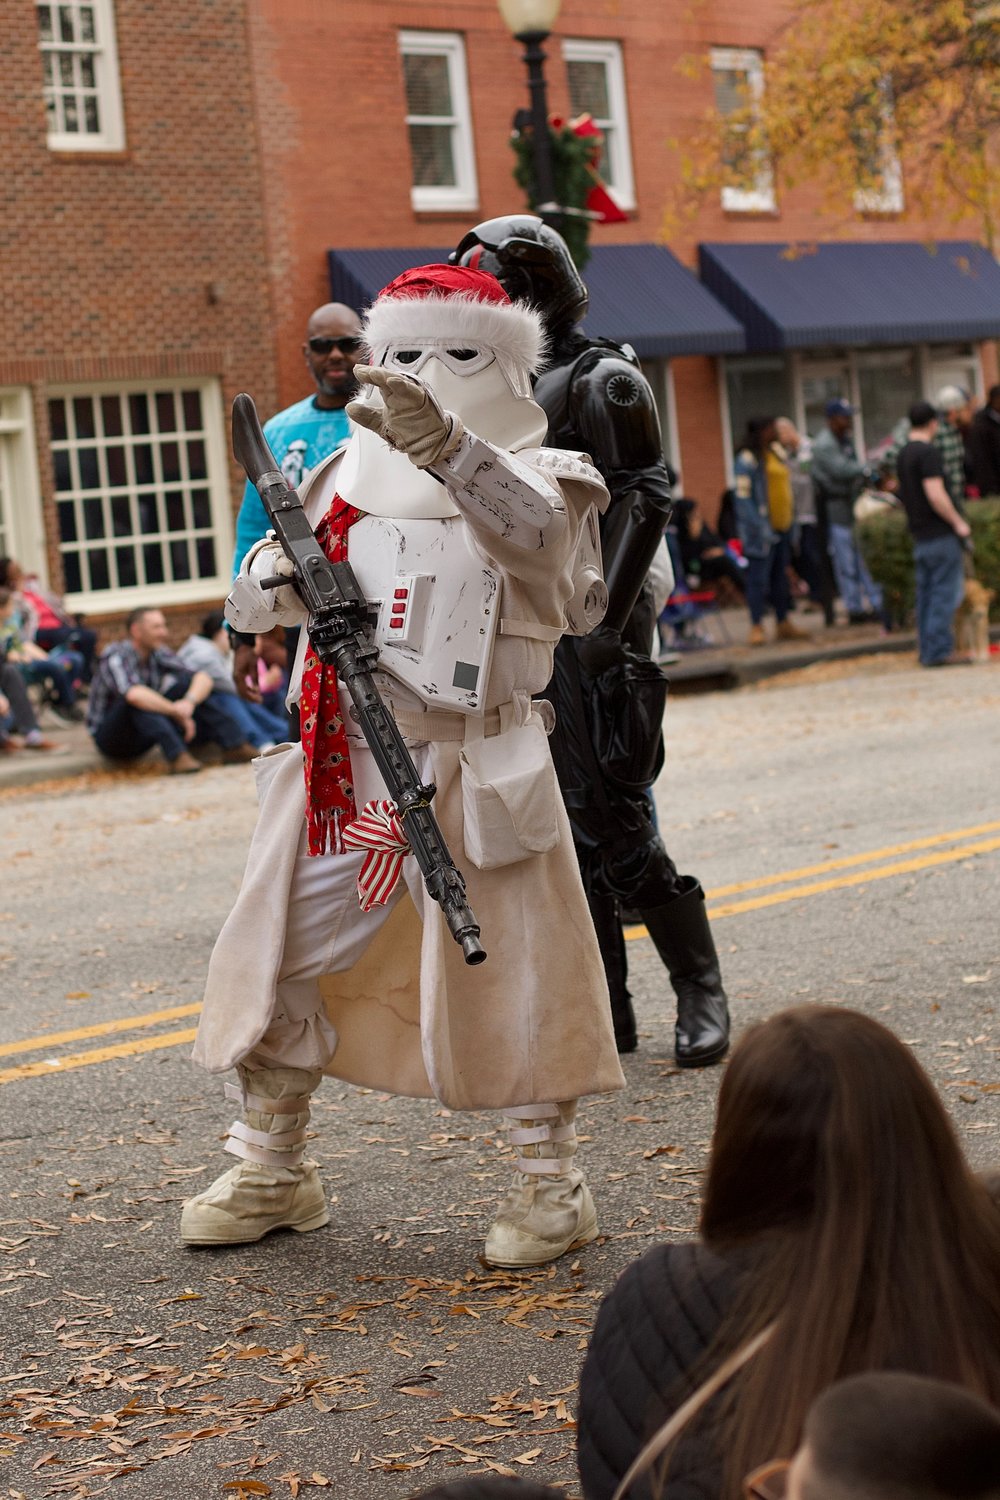 The Fayetteville Rotary Christmas Parade, organized by the Rotary Club of Fayetteville since 1999,  was held on Dec. 3 in downtown Fayetteville. 